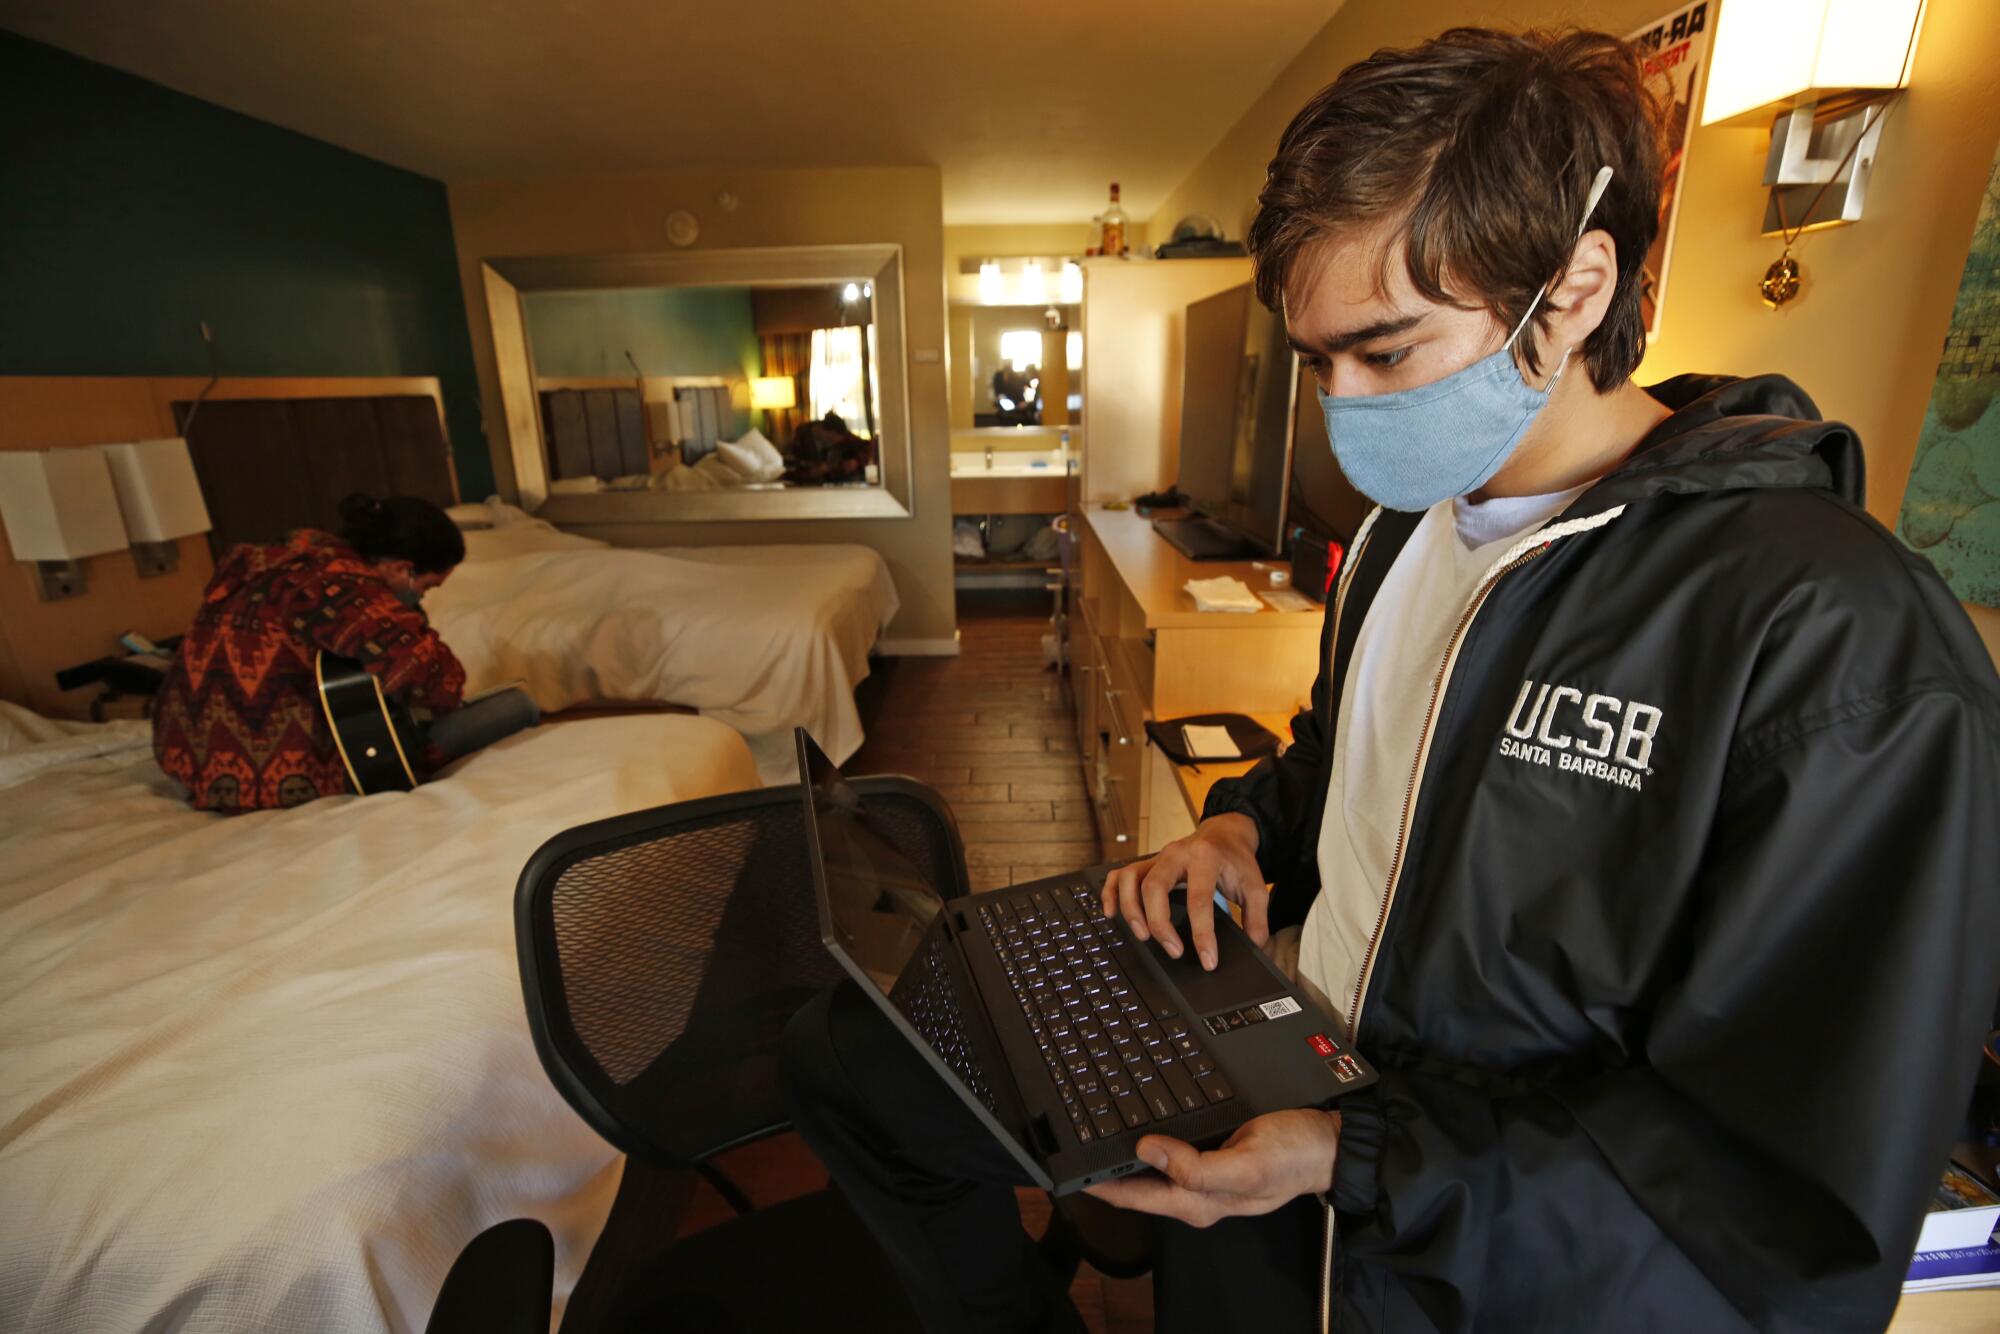 A student works on his laptop in a hotel room